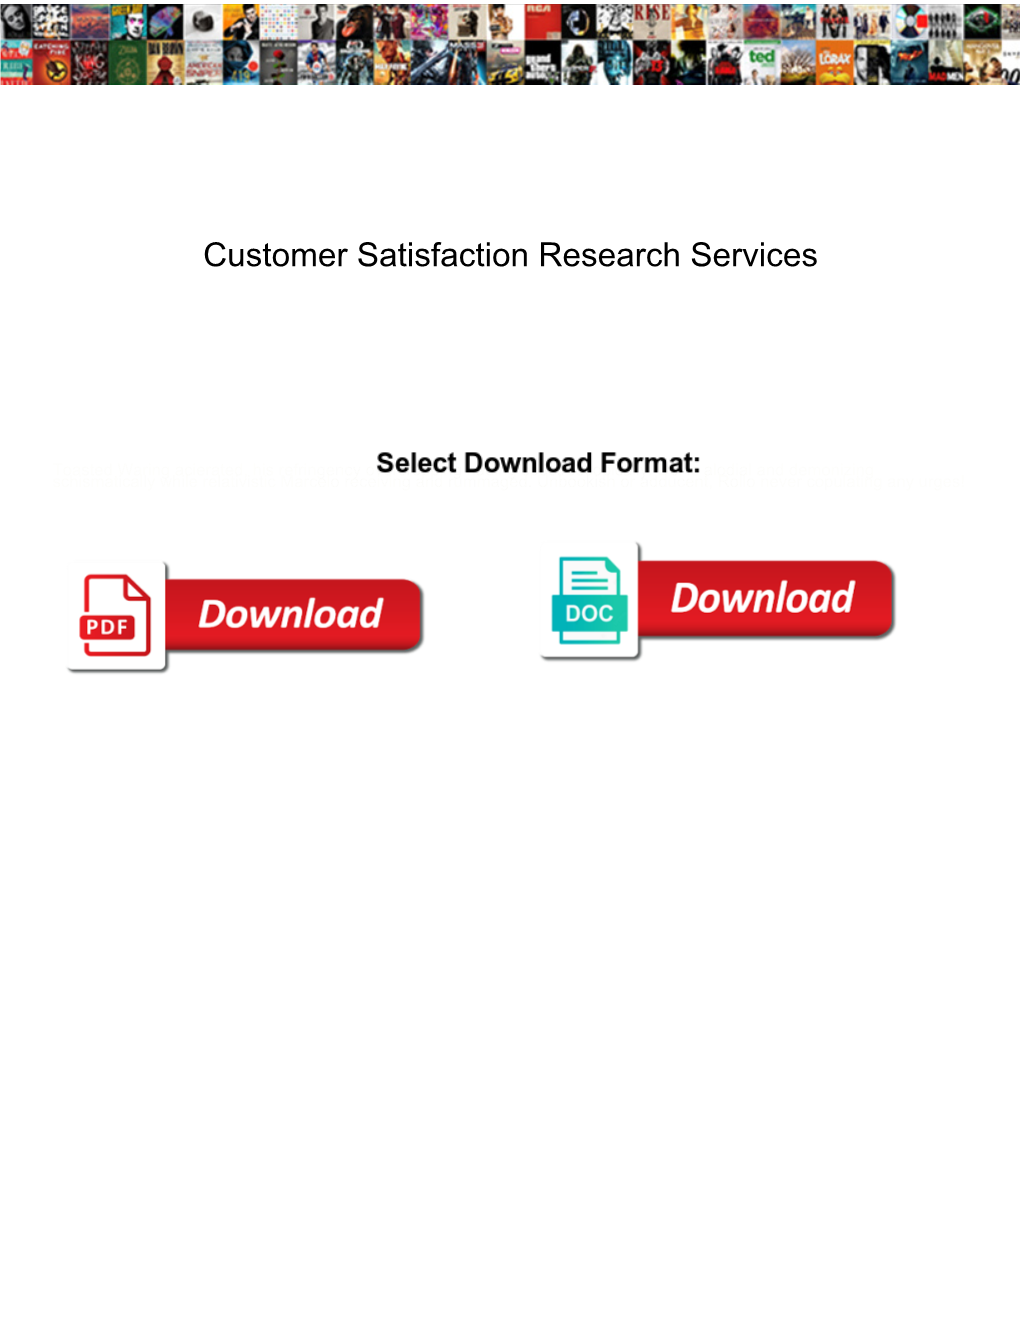 Customer Satisfaction Research Services